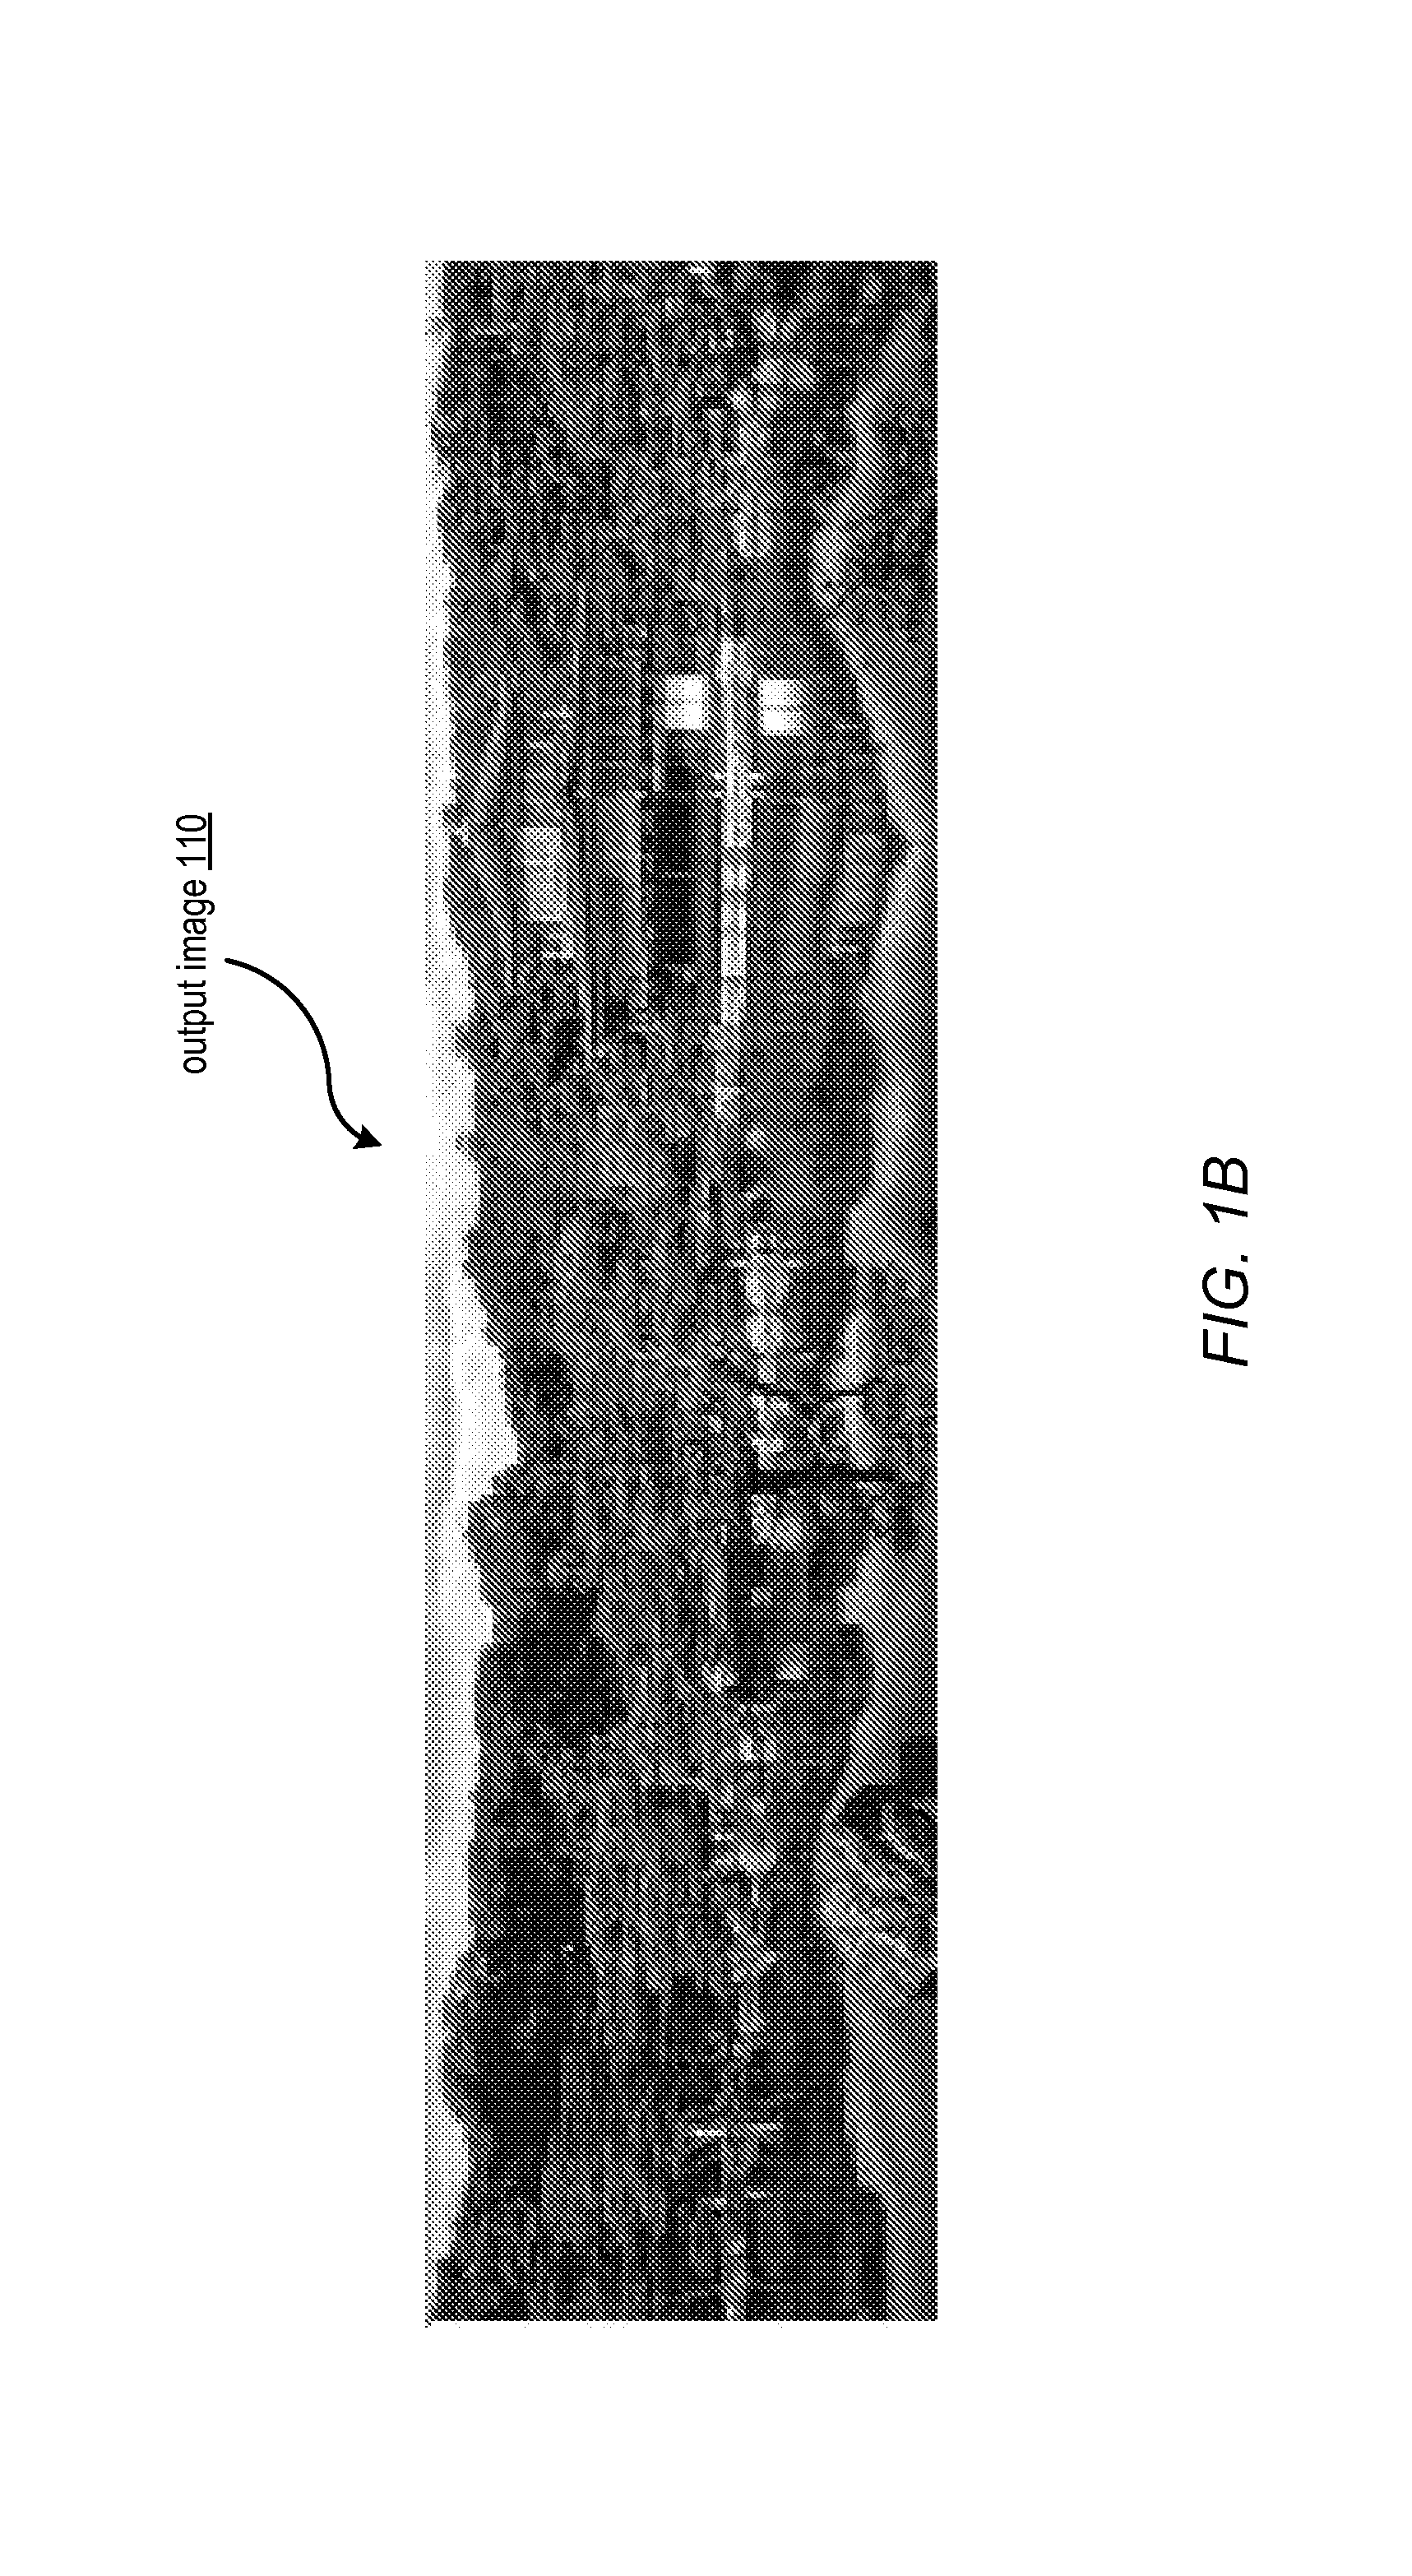 Banded seam carving of images with pyramidal retargeting